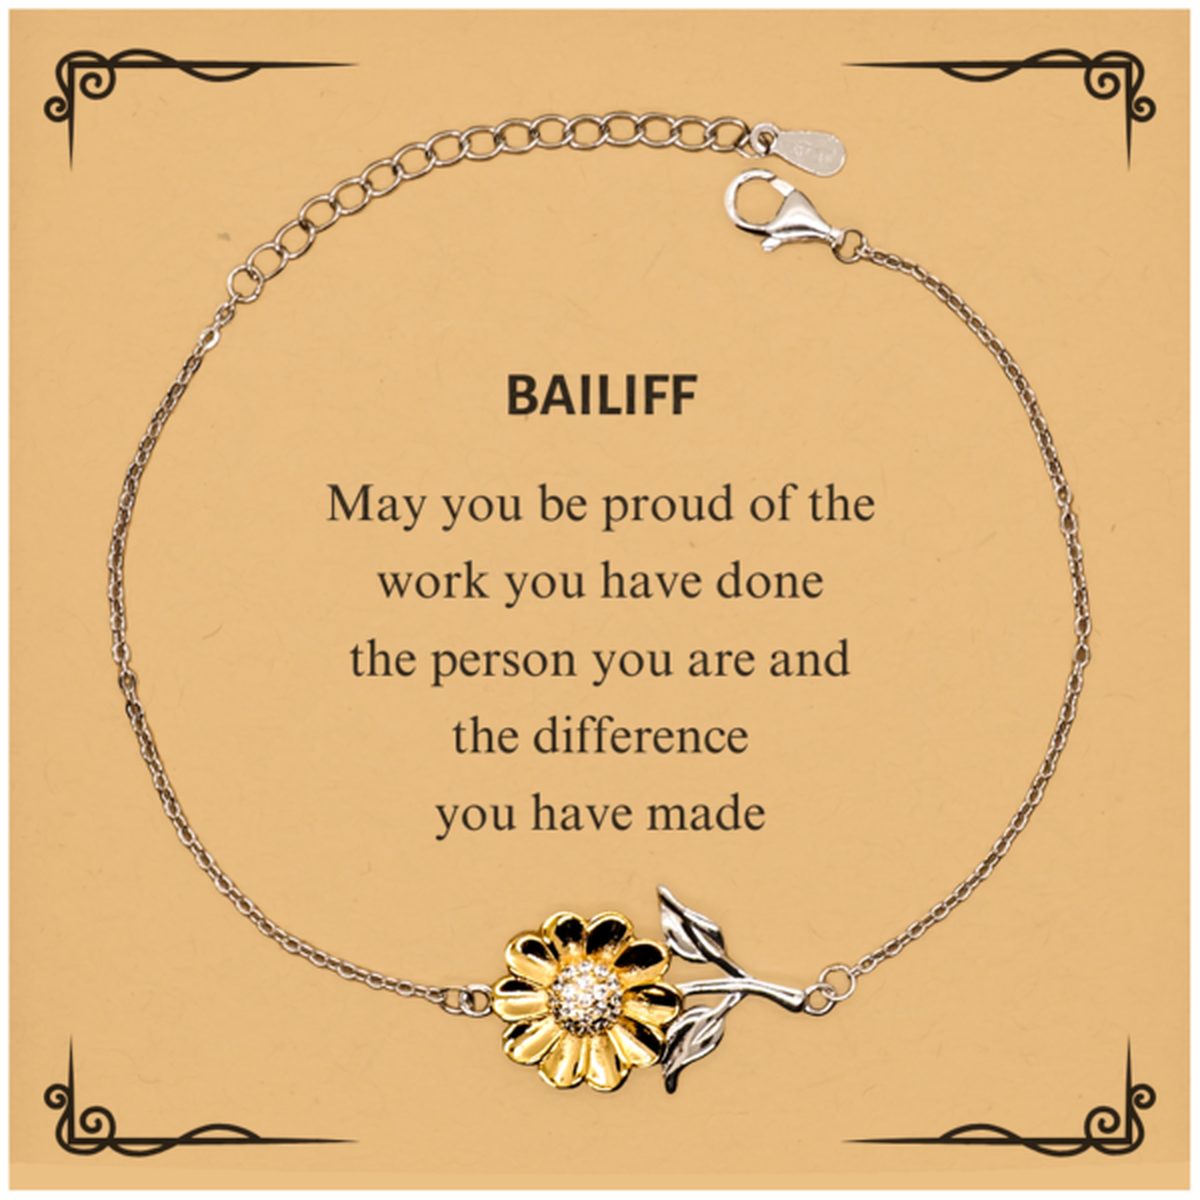 Bailiff May you be proud of the work you have done, Retirement Bailiff Sunflower Bracelet for Colleague Appreciation Gifts Amazing for Bailiff